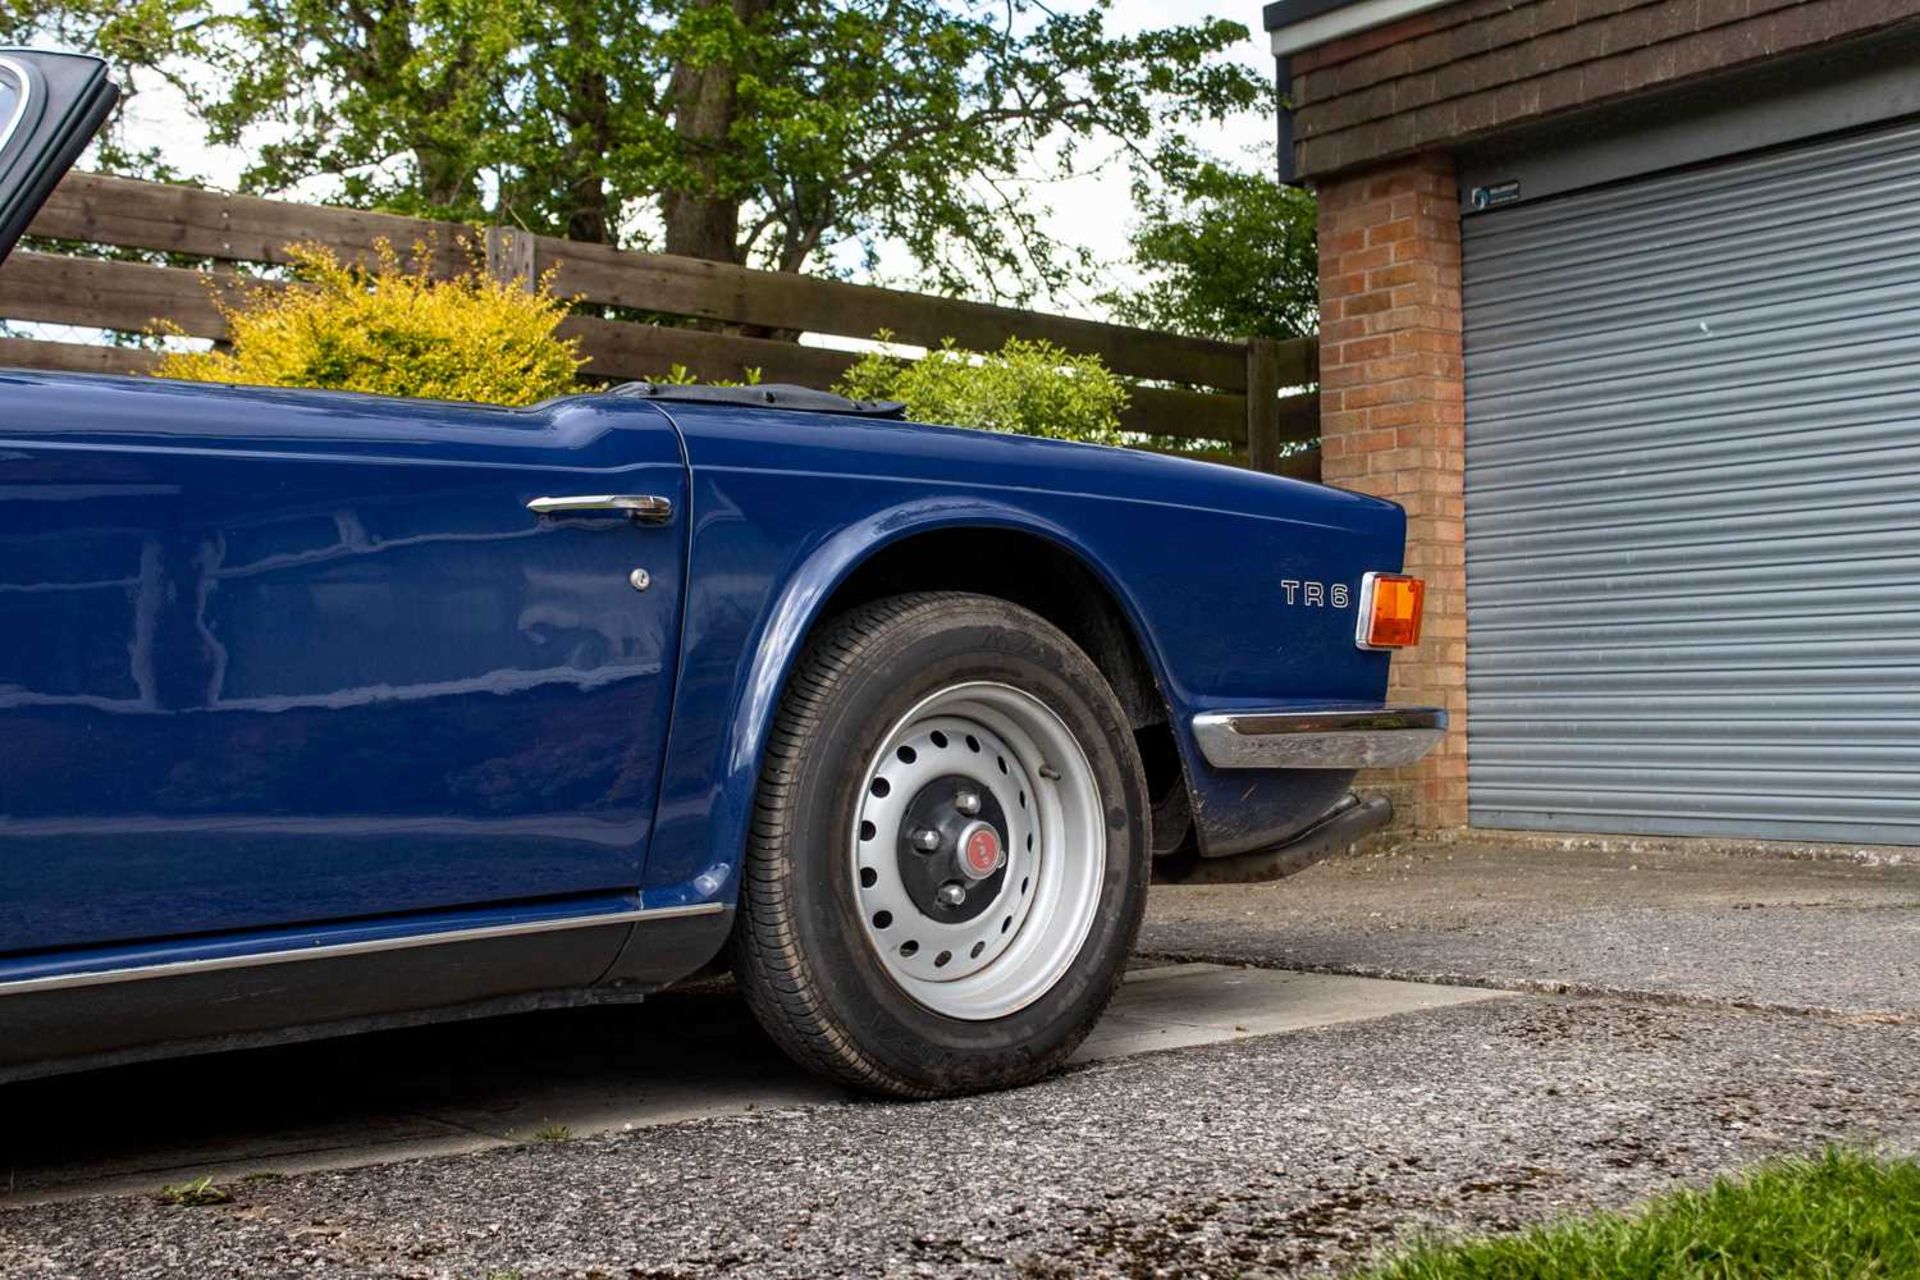 1972 Triumph TR6 Home market example, specified with manual overdrive transmission - Image 37 of 95